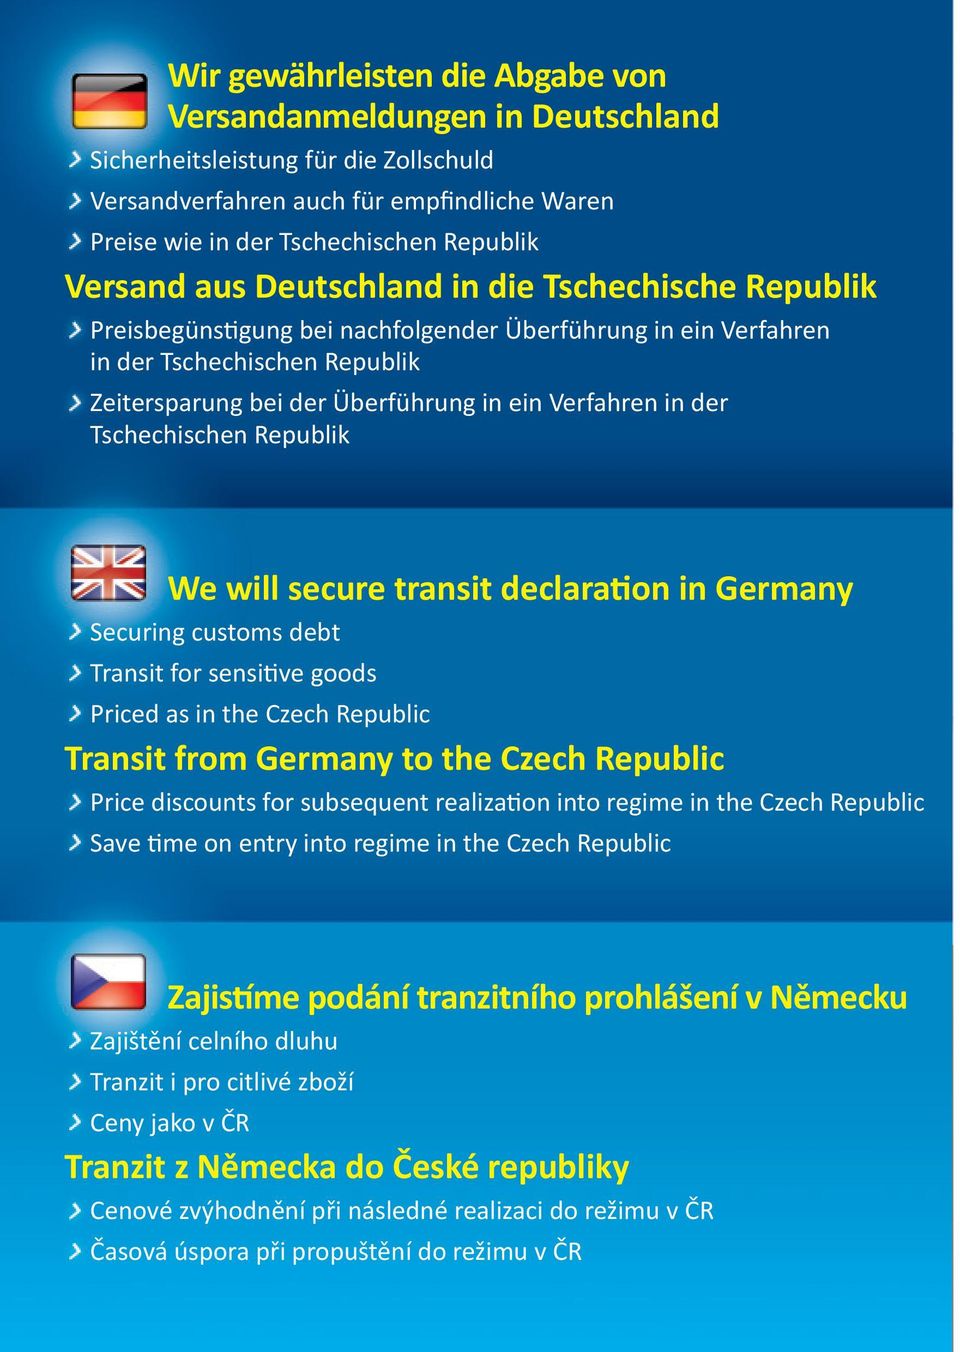 Tschechischen Republik We will secure transit declara on in Germany Securing customs debt Transit for sensi ve goods Priced as in the Czech Republic Transit from Germany to the Czech Republic Price